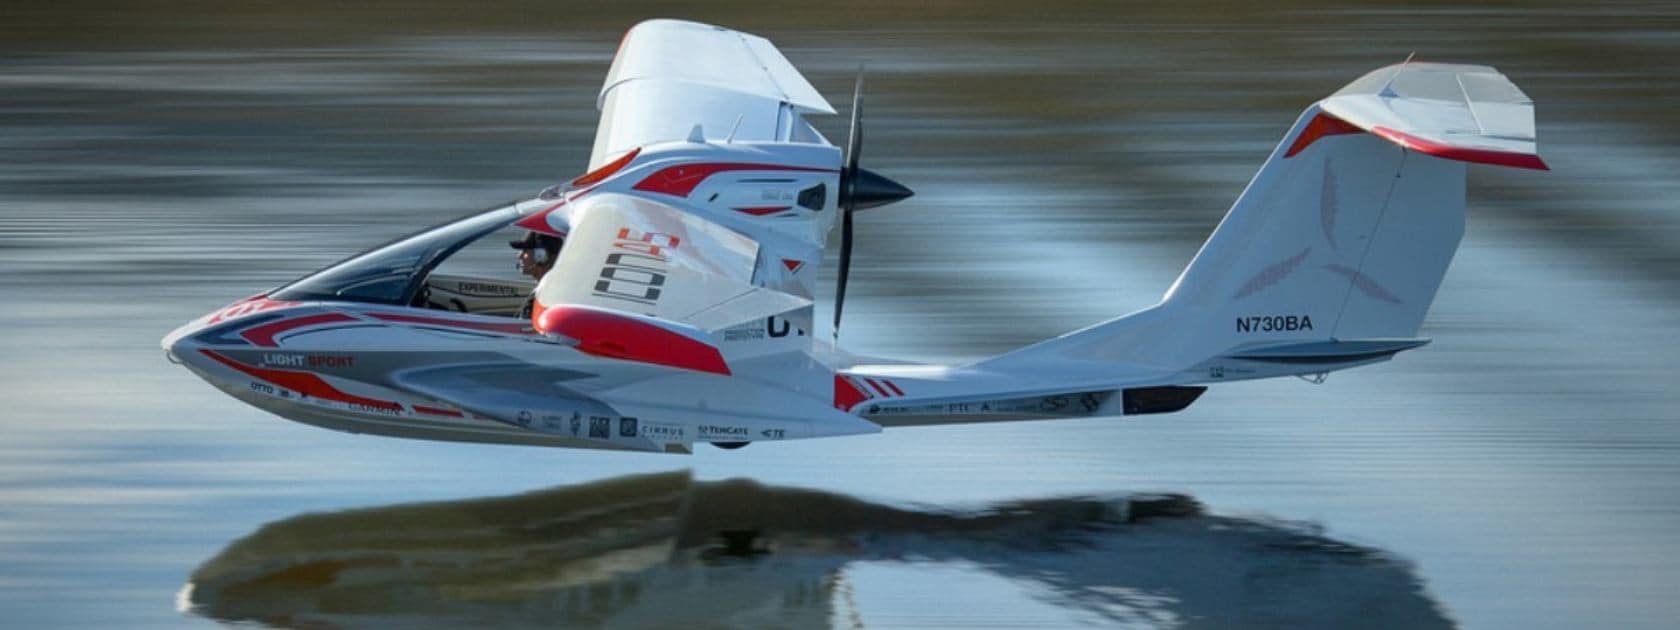 Amphibious ICON A5 about to land on water